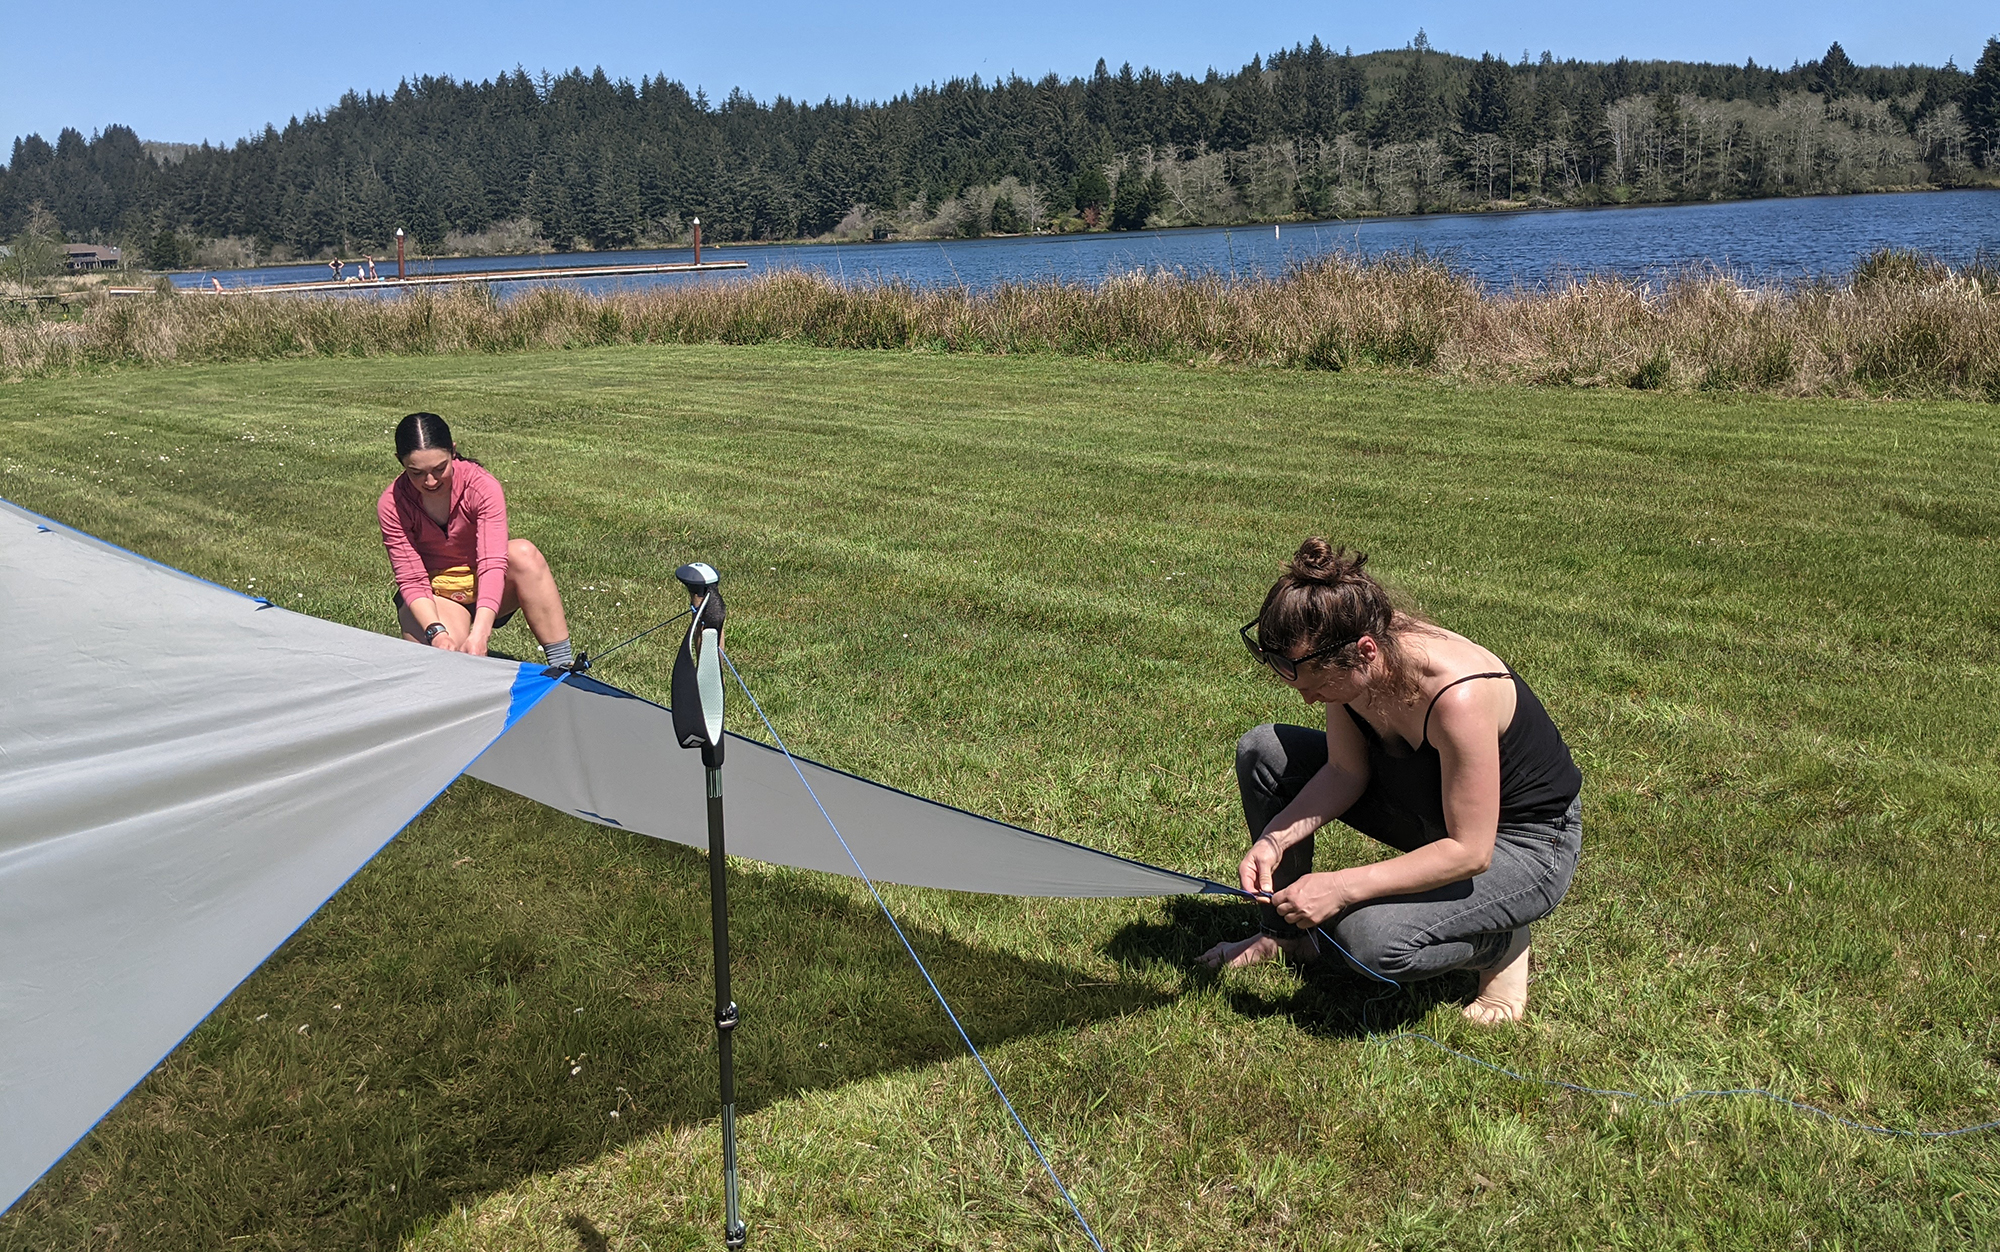 It took a surprising amount of brainpower and persistence for these two thru-hikers to figure out the correct pitch of the ultralight Stone Glacier SkyTarp UL.